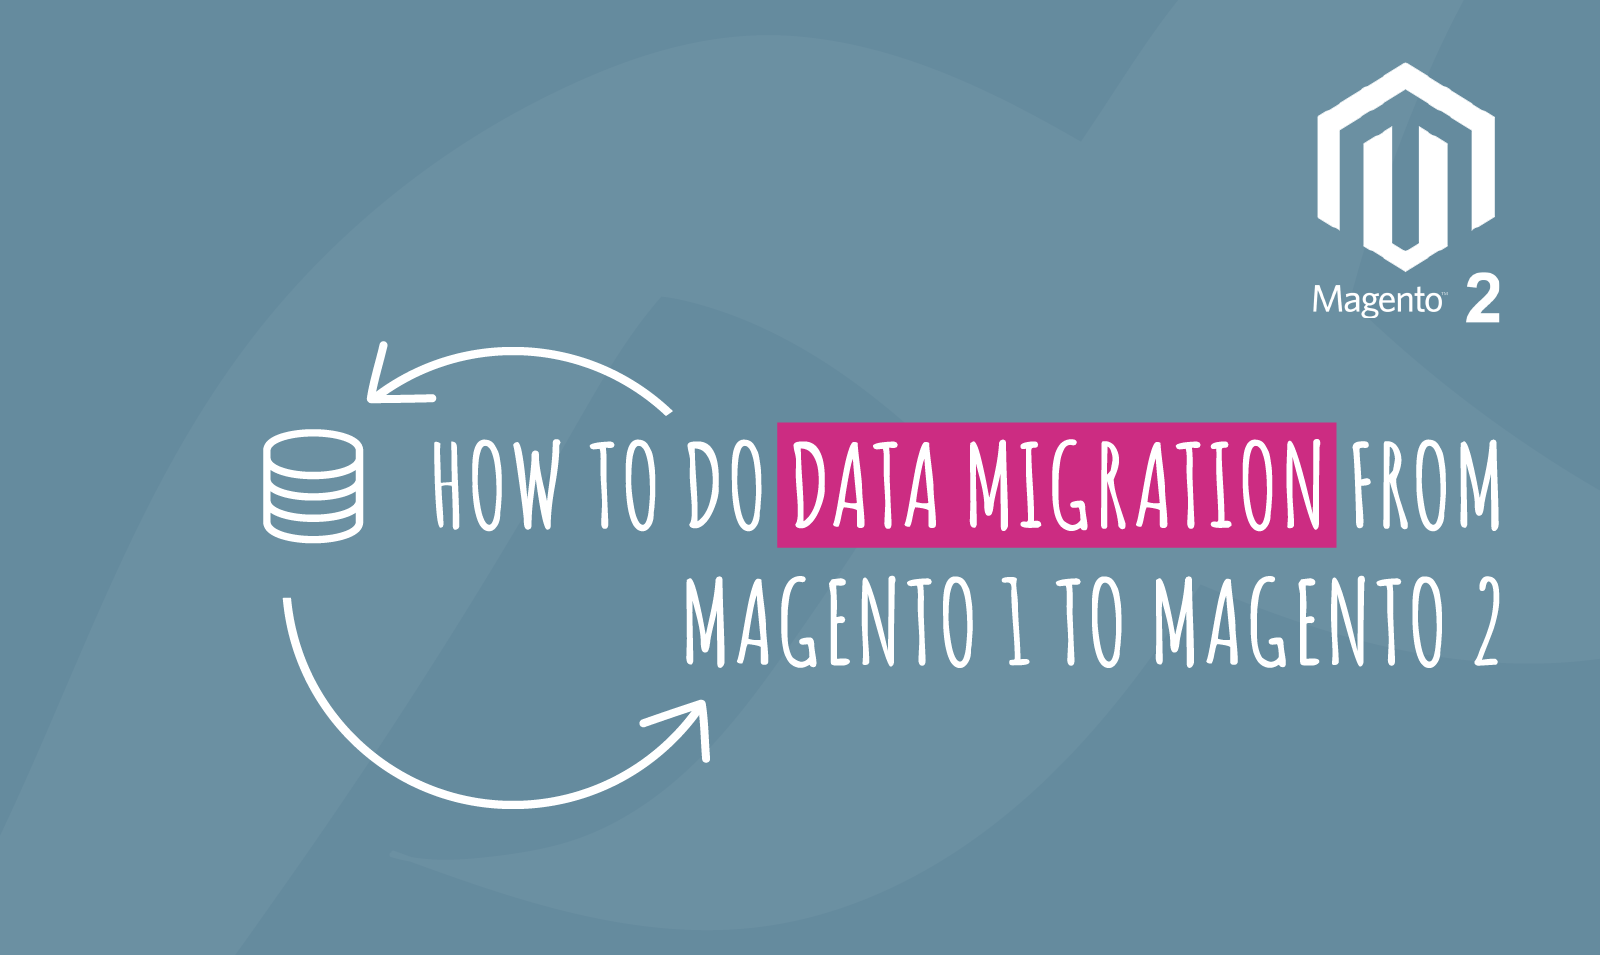 HOW TO DO DATA MIGRATION FROM MAGENTO 1 TO MAGENTO 2